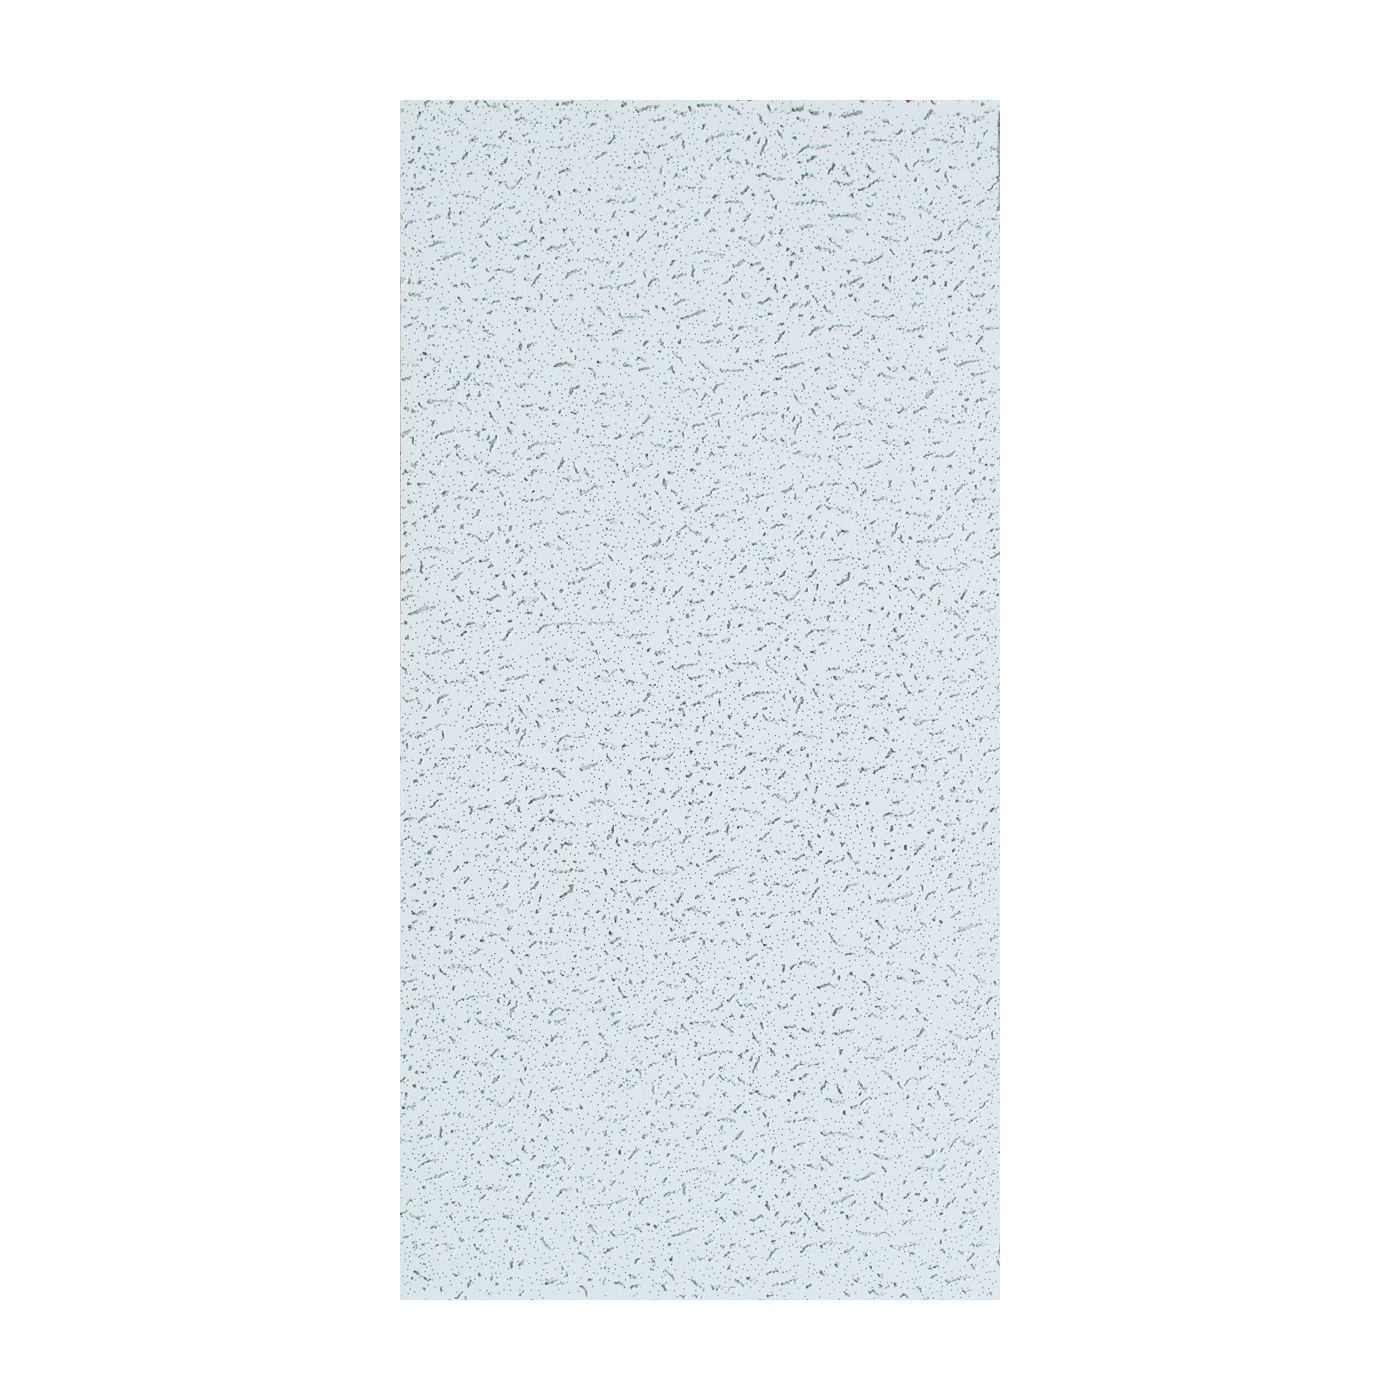 Fifth Avenue Series 280 Ceiling Panel, 4 ft L, 2 ft W, 5/8 in Thick, Mineral Fiber, White